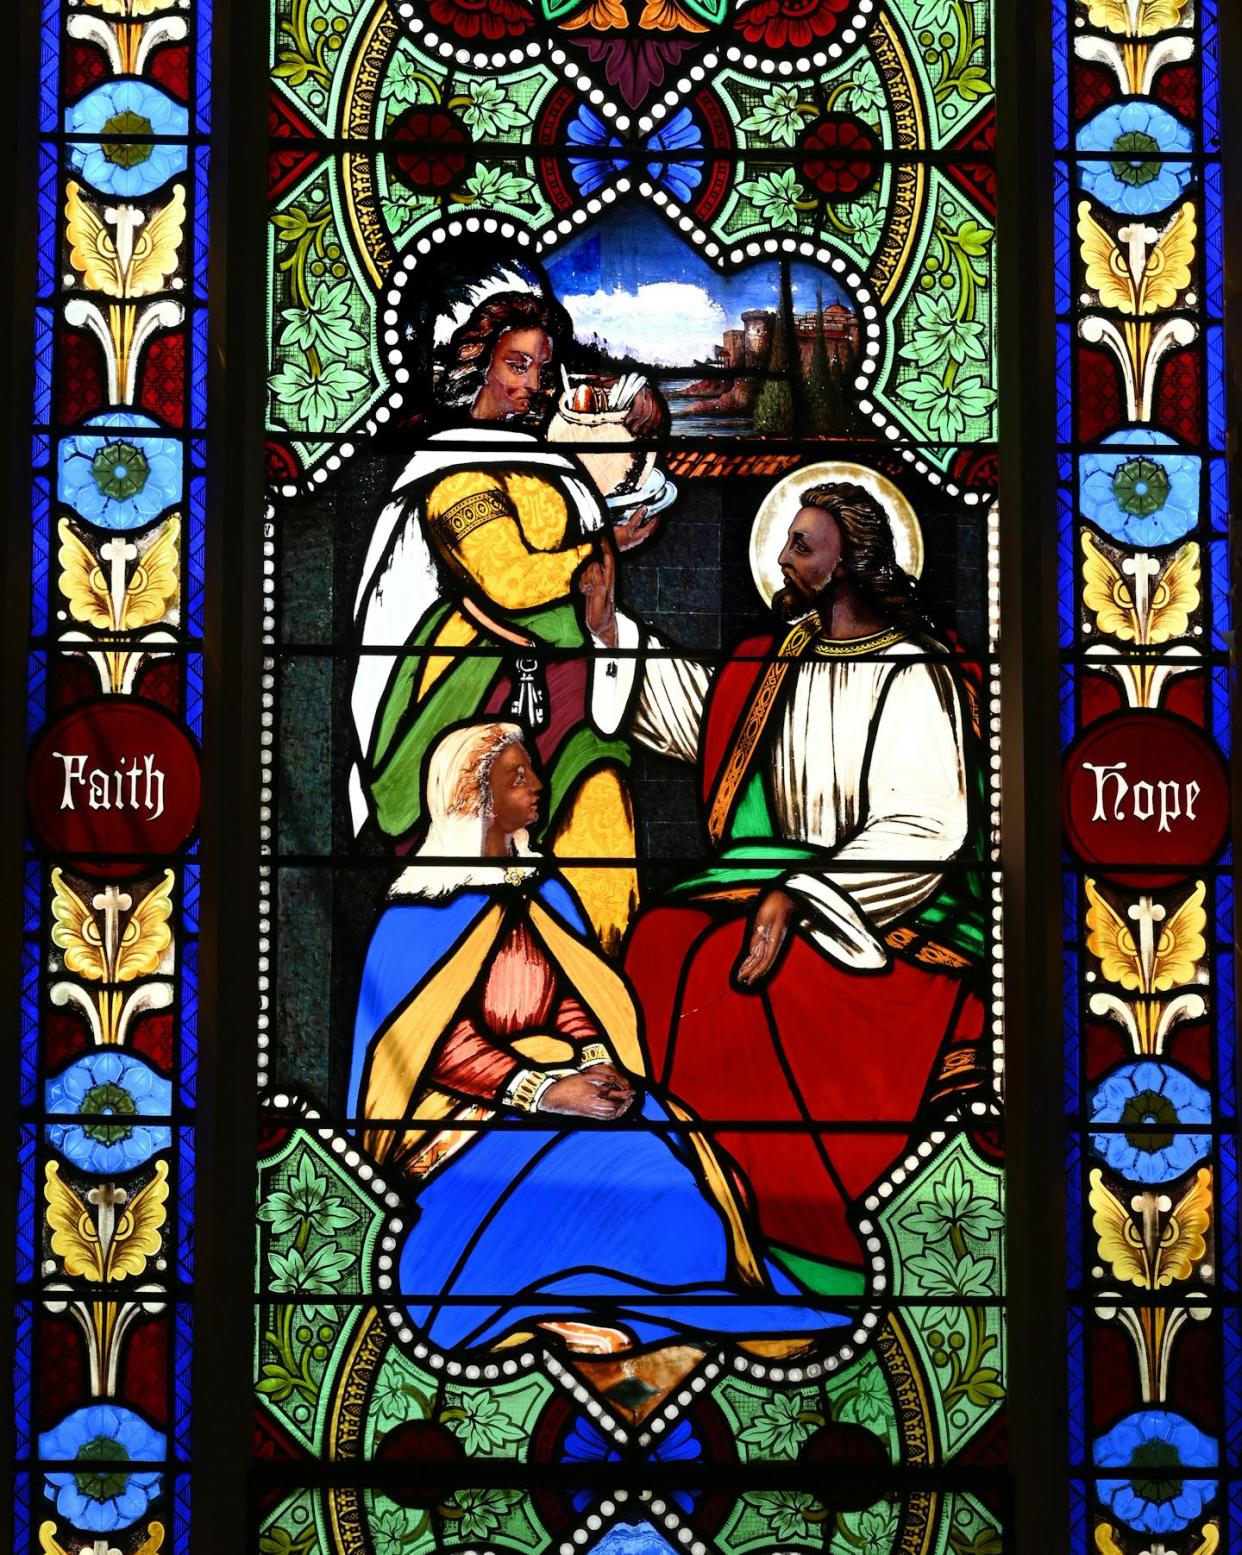 A stained-glass window that was part of a church shows a dark-skinned Jesus, which was unusual at the time. Michel M. Raguin